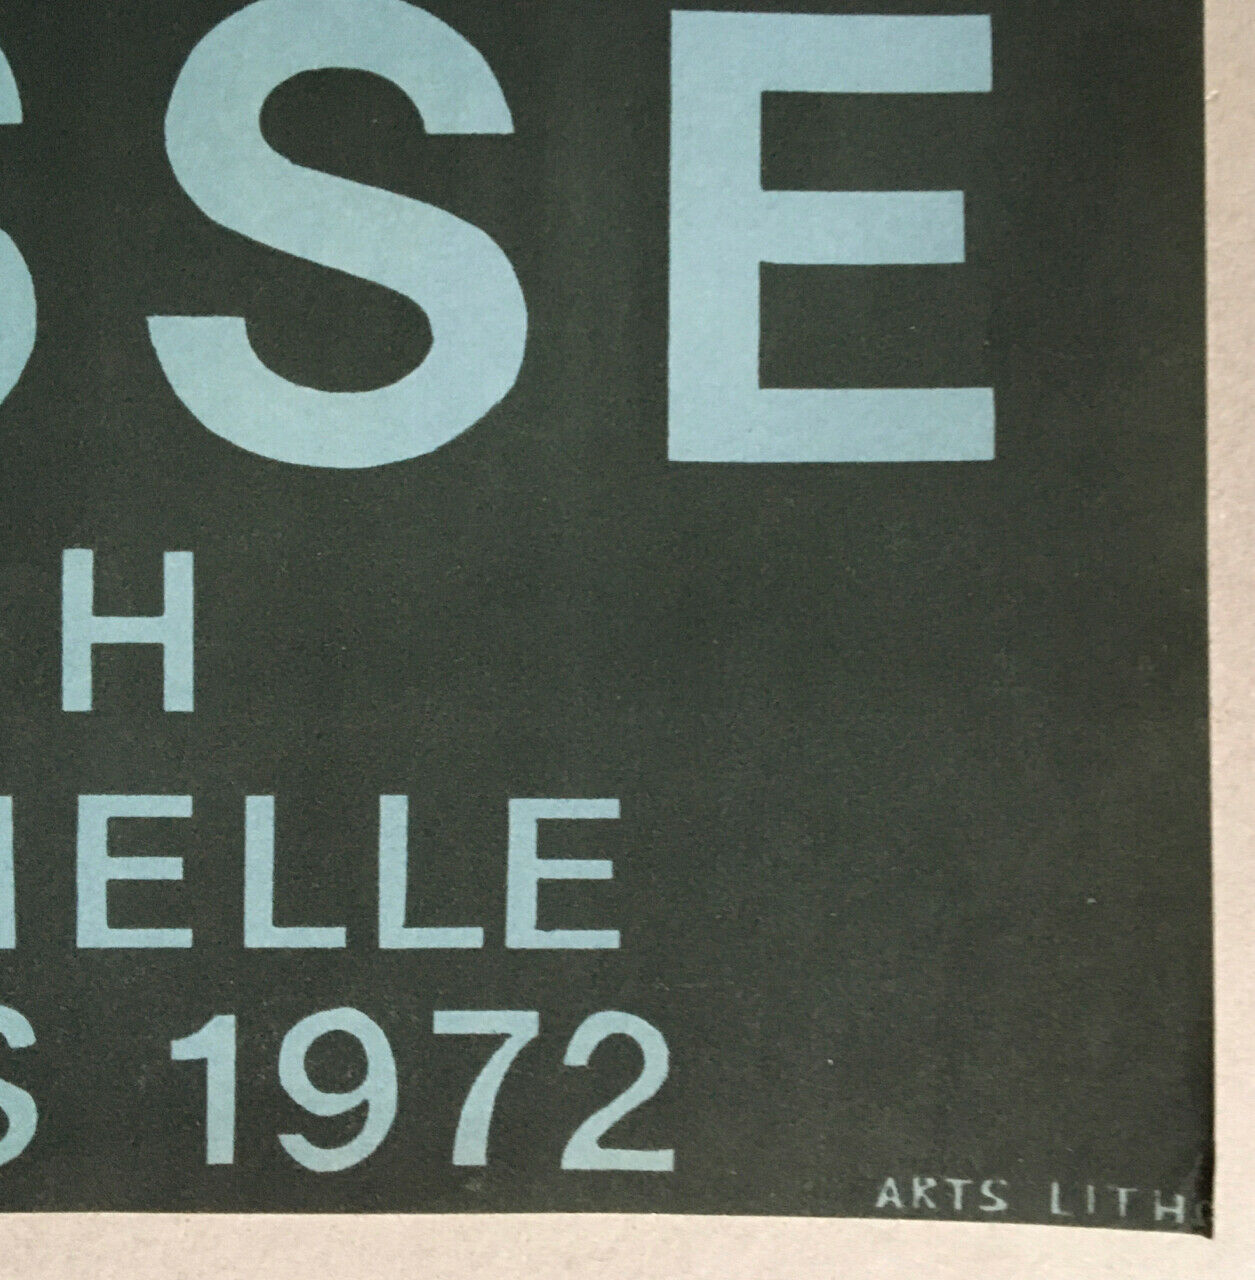 Claude Manesse — affiche lithographique — Galerie Sybil Welch — 1972.